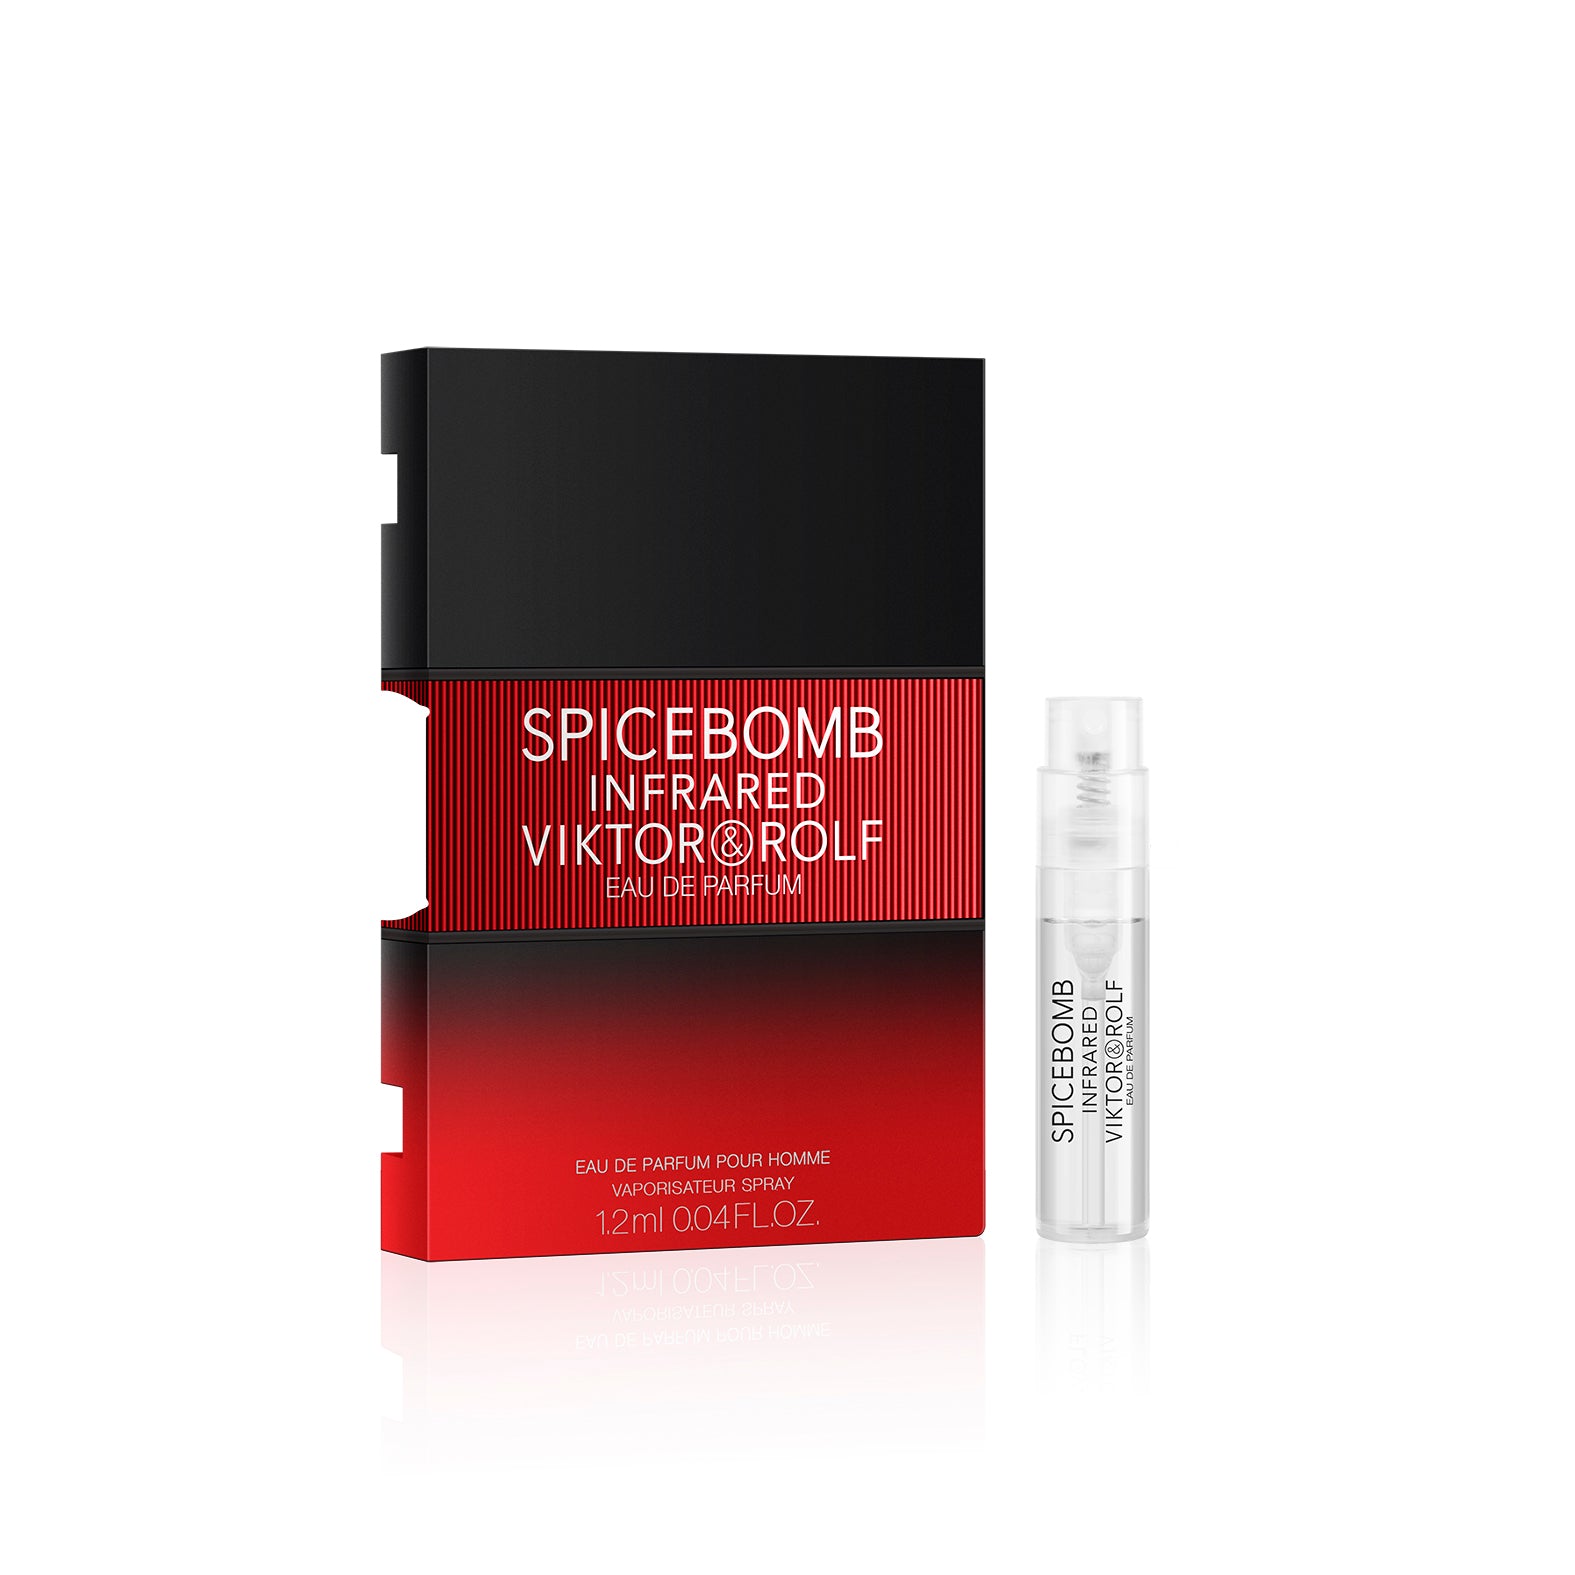 Viktor & Rolf Spicebomb Infrared Eau De Toilette Spray 90ml/3.04oz  (Unboxed) buy in United States with free shipping CosmoStore